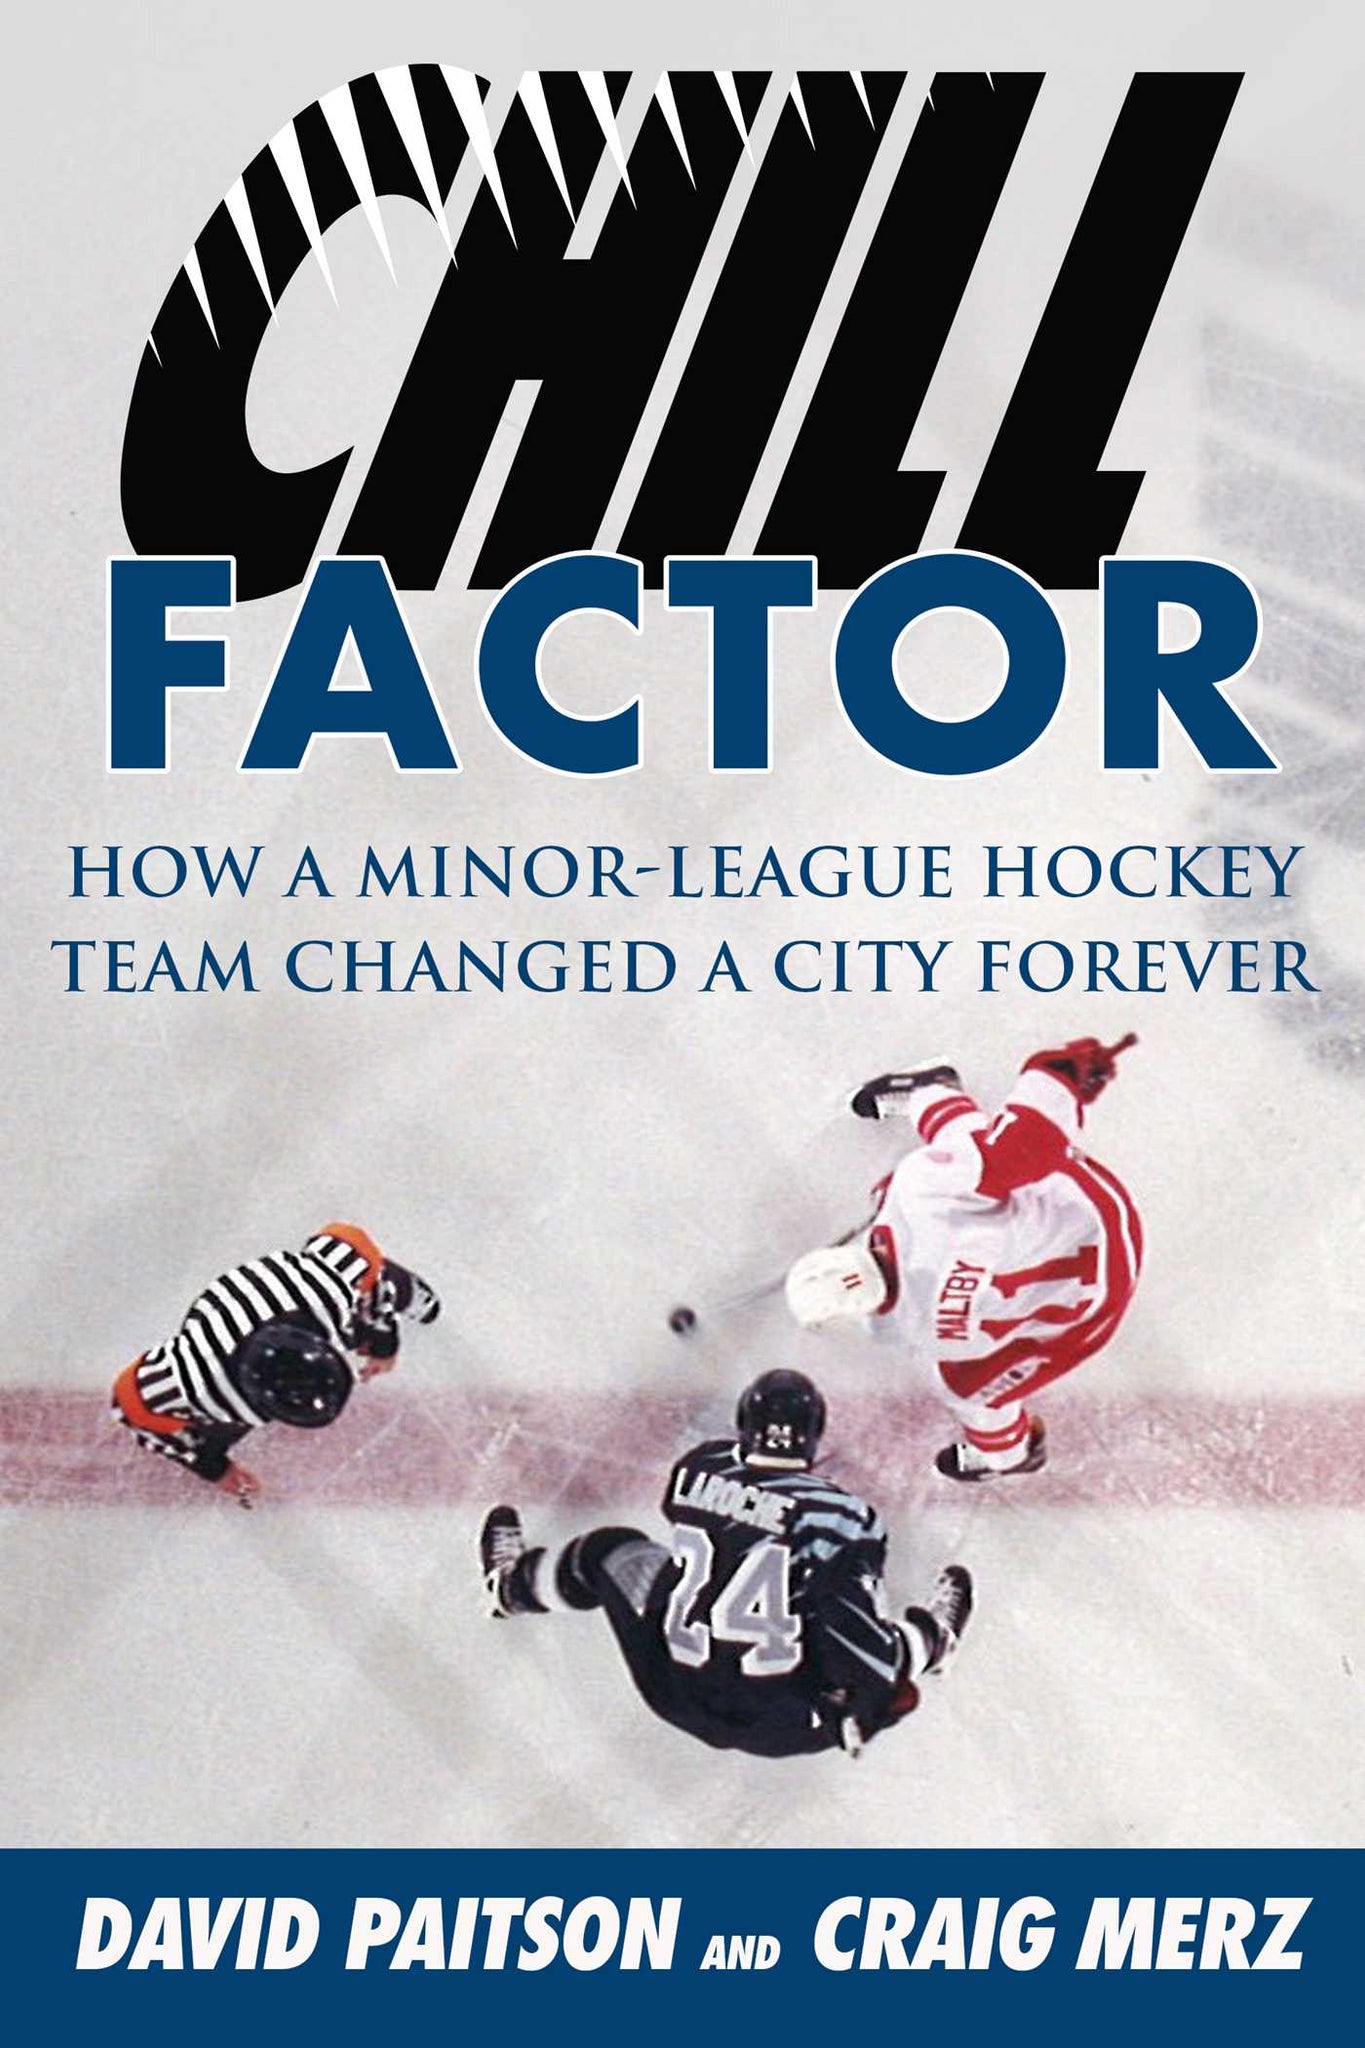 Chill Factor : How a Minor-League Hockey Team Changed a City Forever